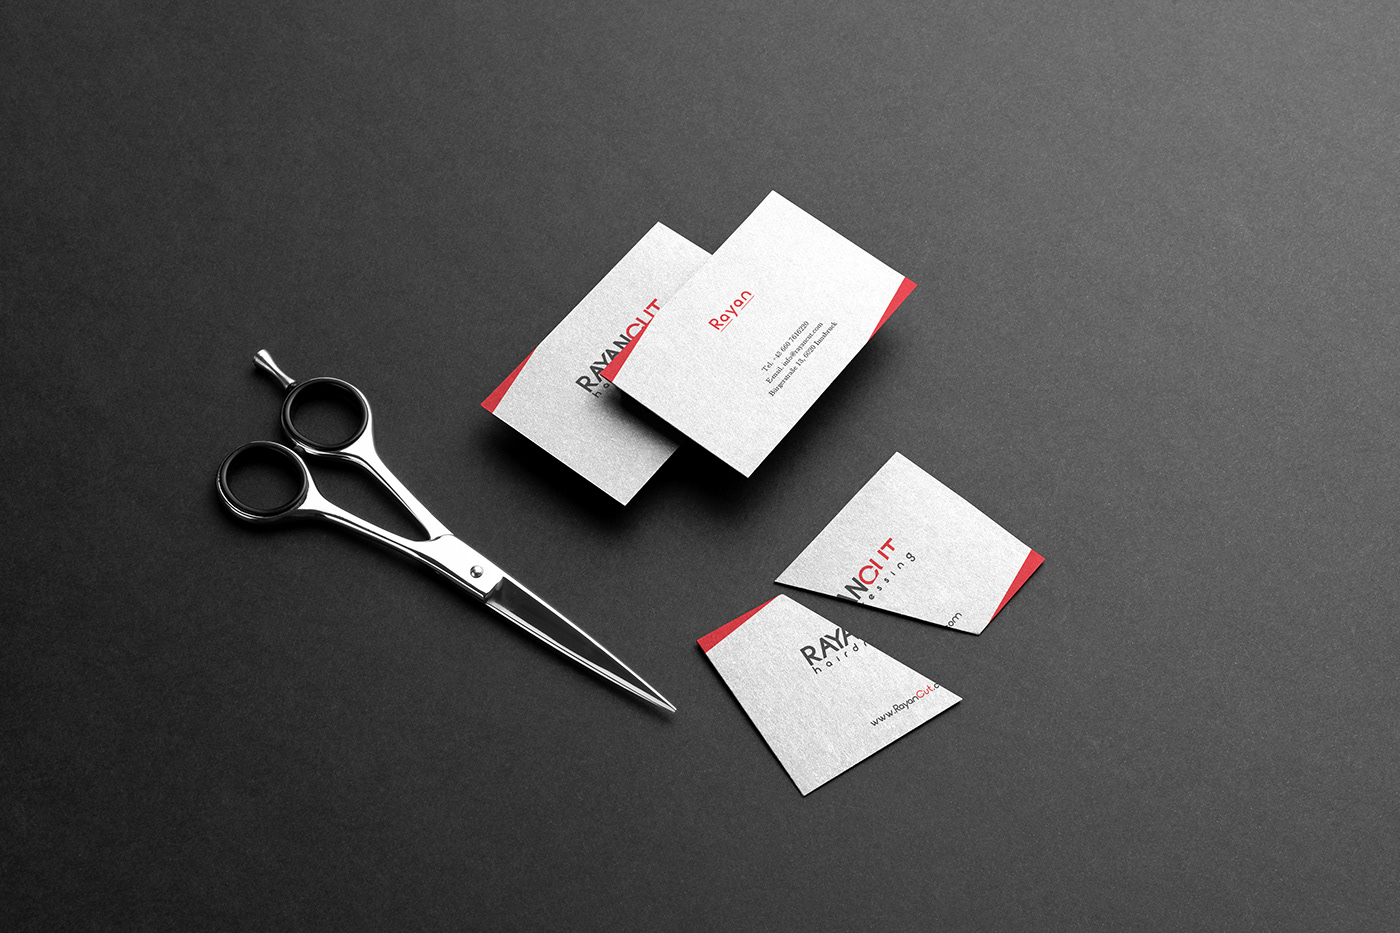 barber barbershop Hairstylist hairstyle barber shop brand identity Logo Design Graphic Designer visual identity hairstyling